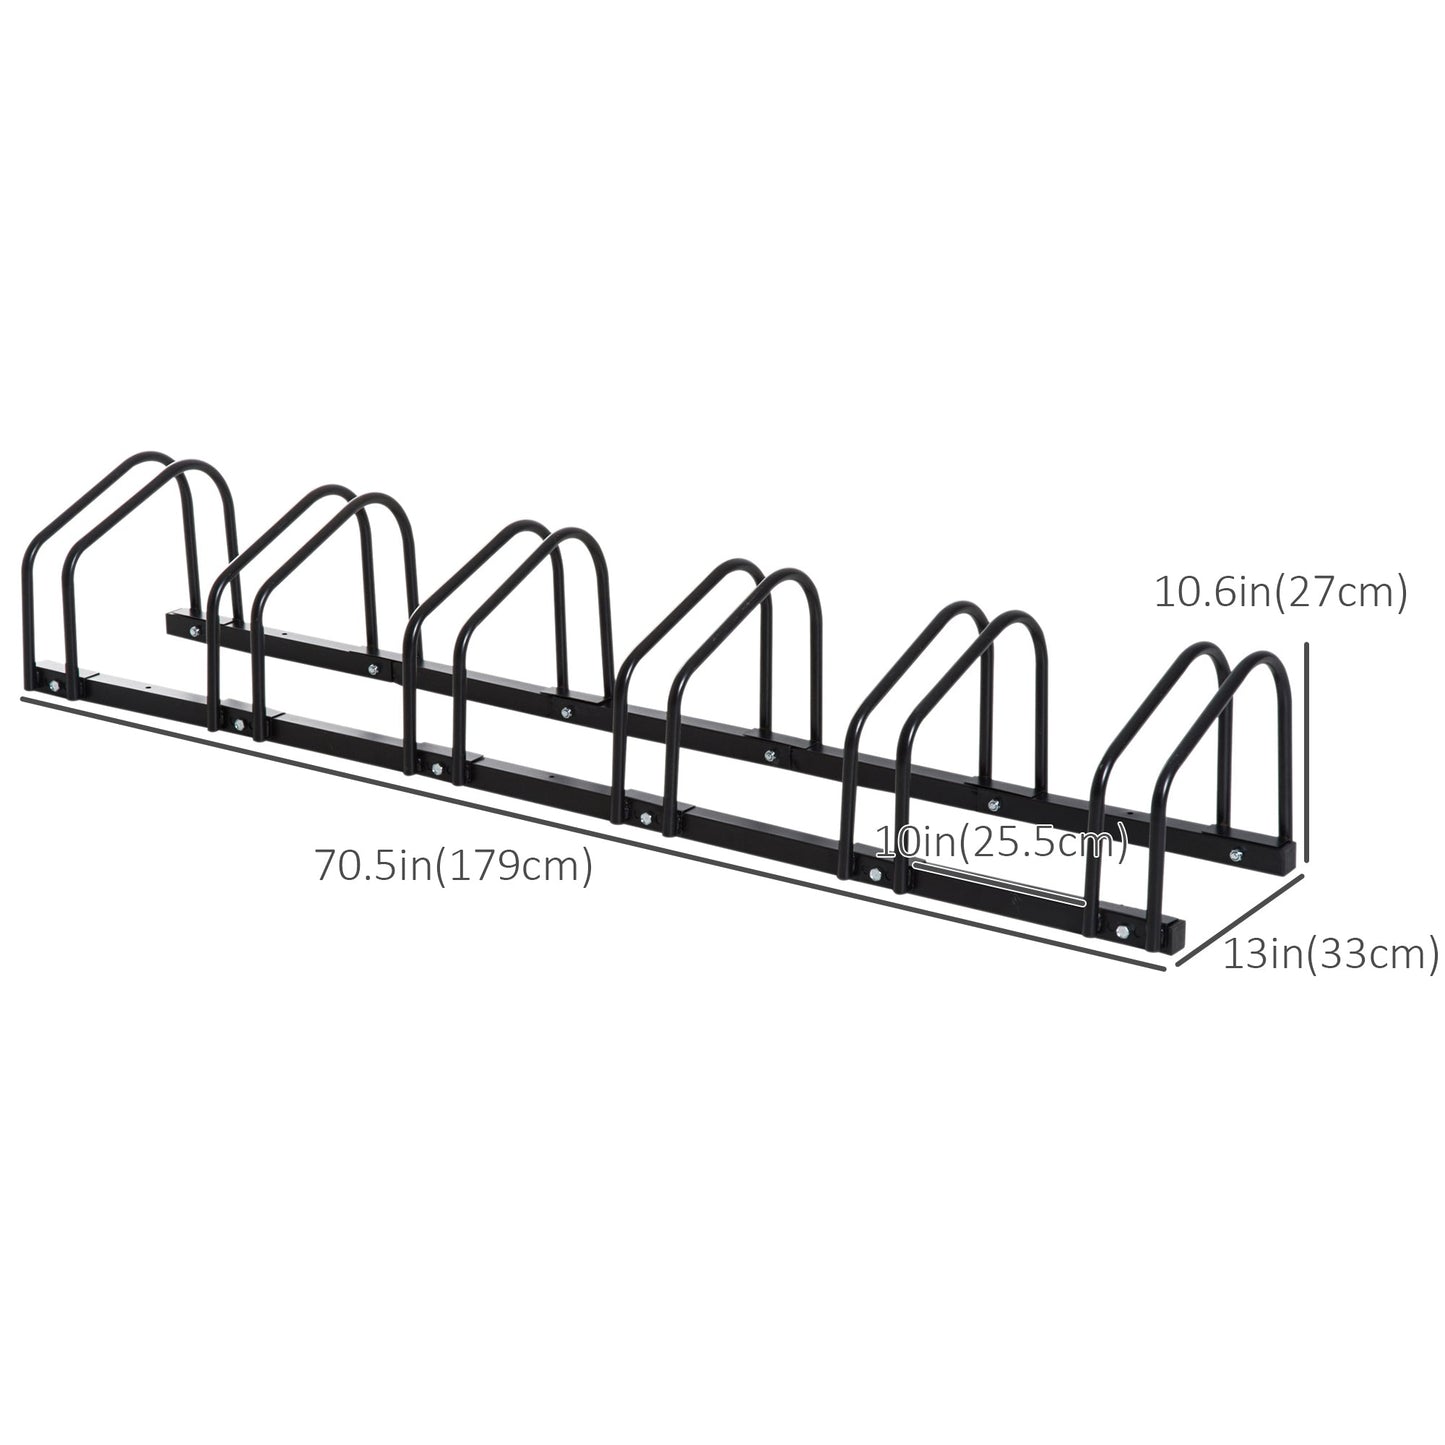 6-Bike Bicycle Floor Parking Rack Cycling Storage Stand Ground Mount Garage Organizer for Indoor and Outdoor Use Black at Gallery Canada